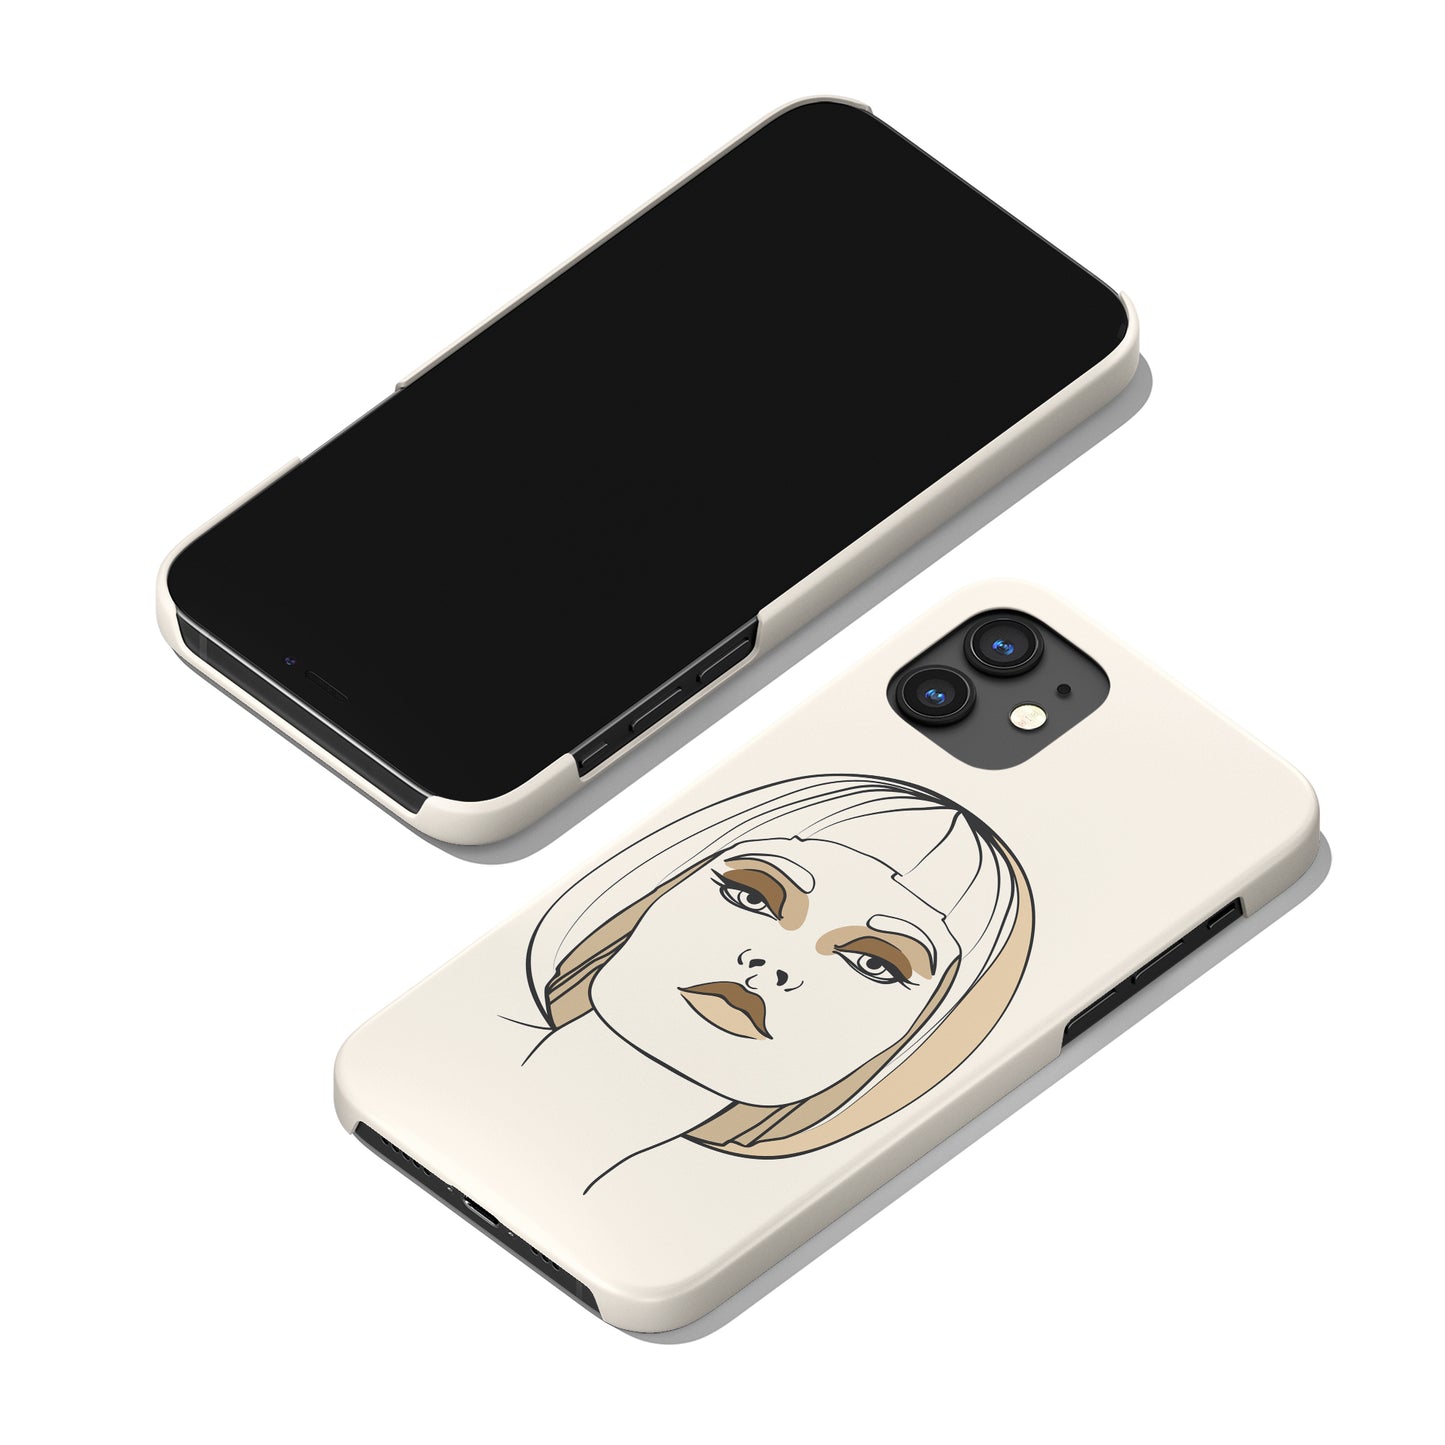 Woman Fashion Face iPhone Case